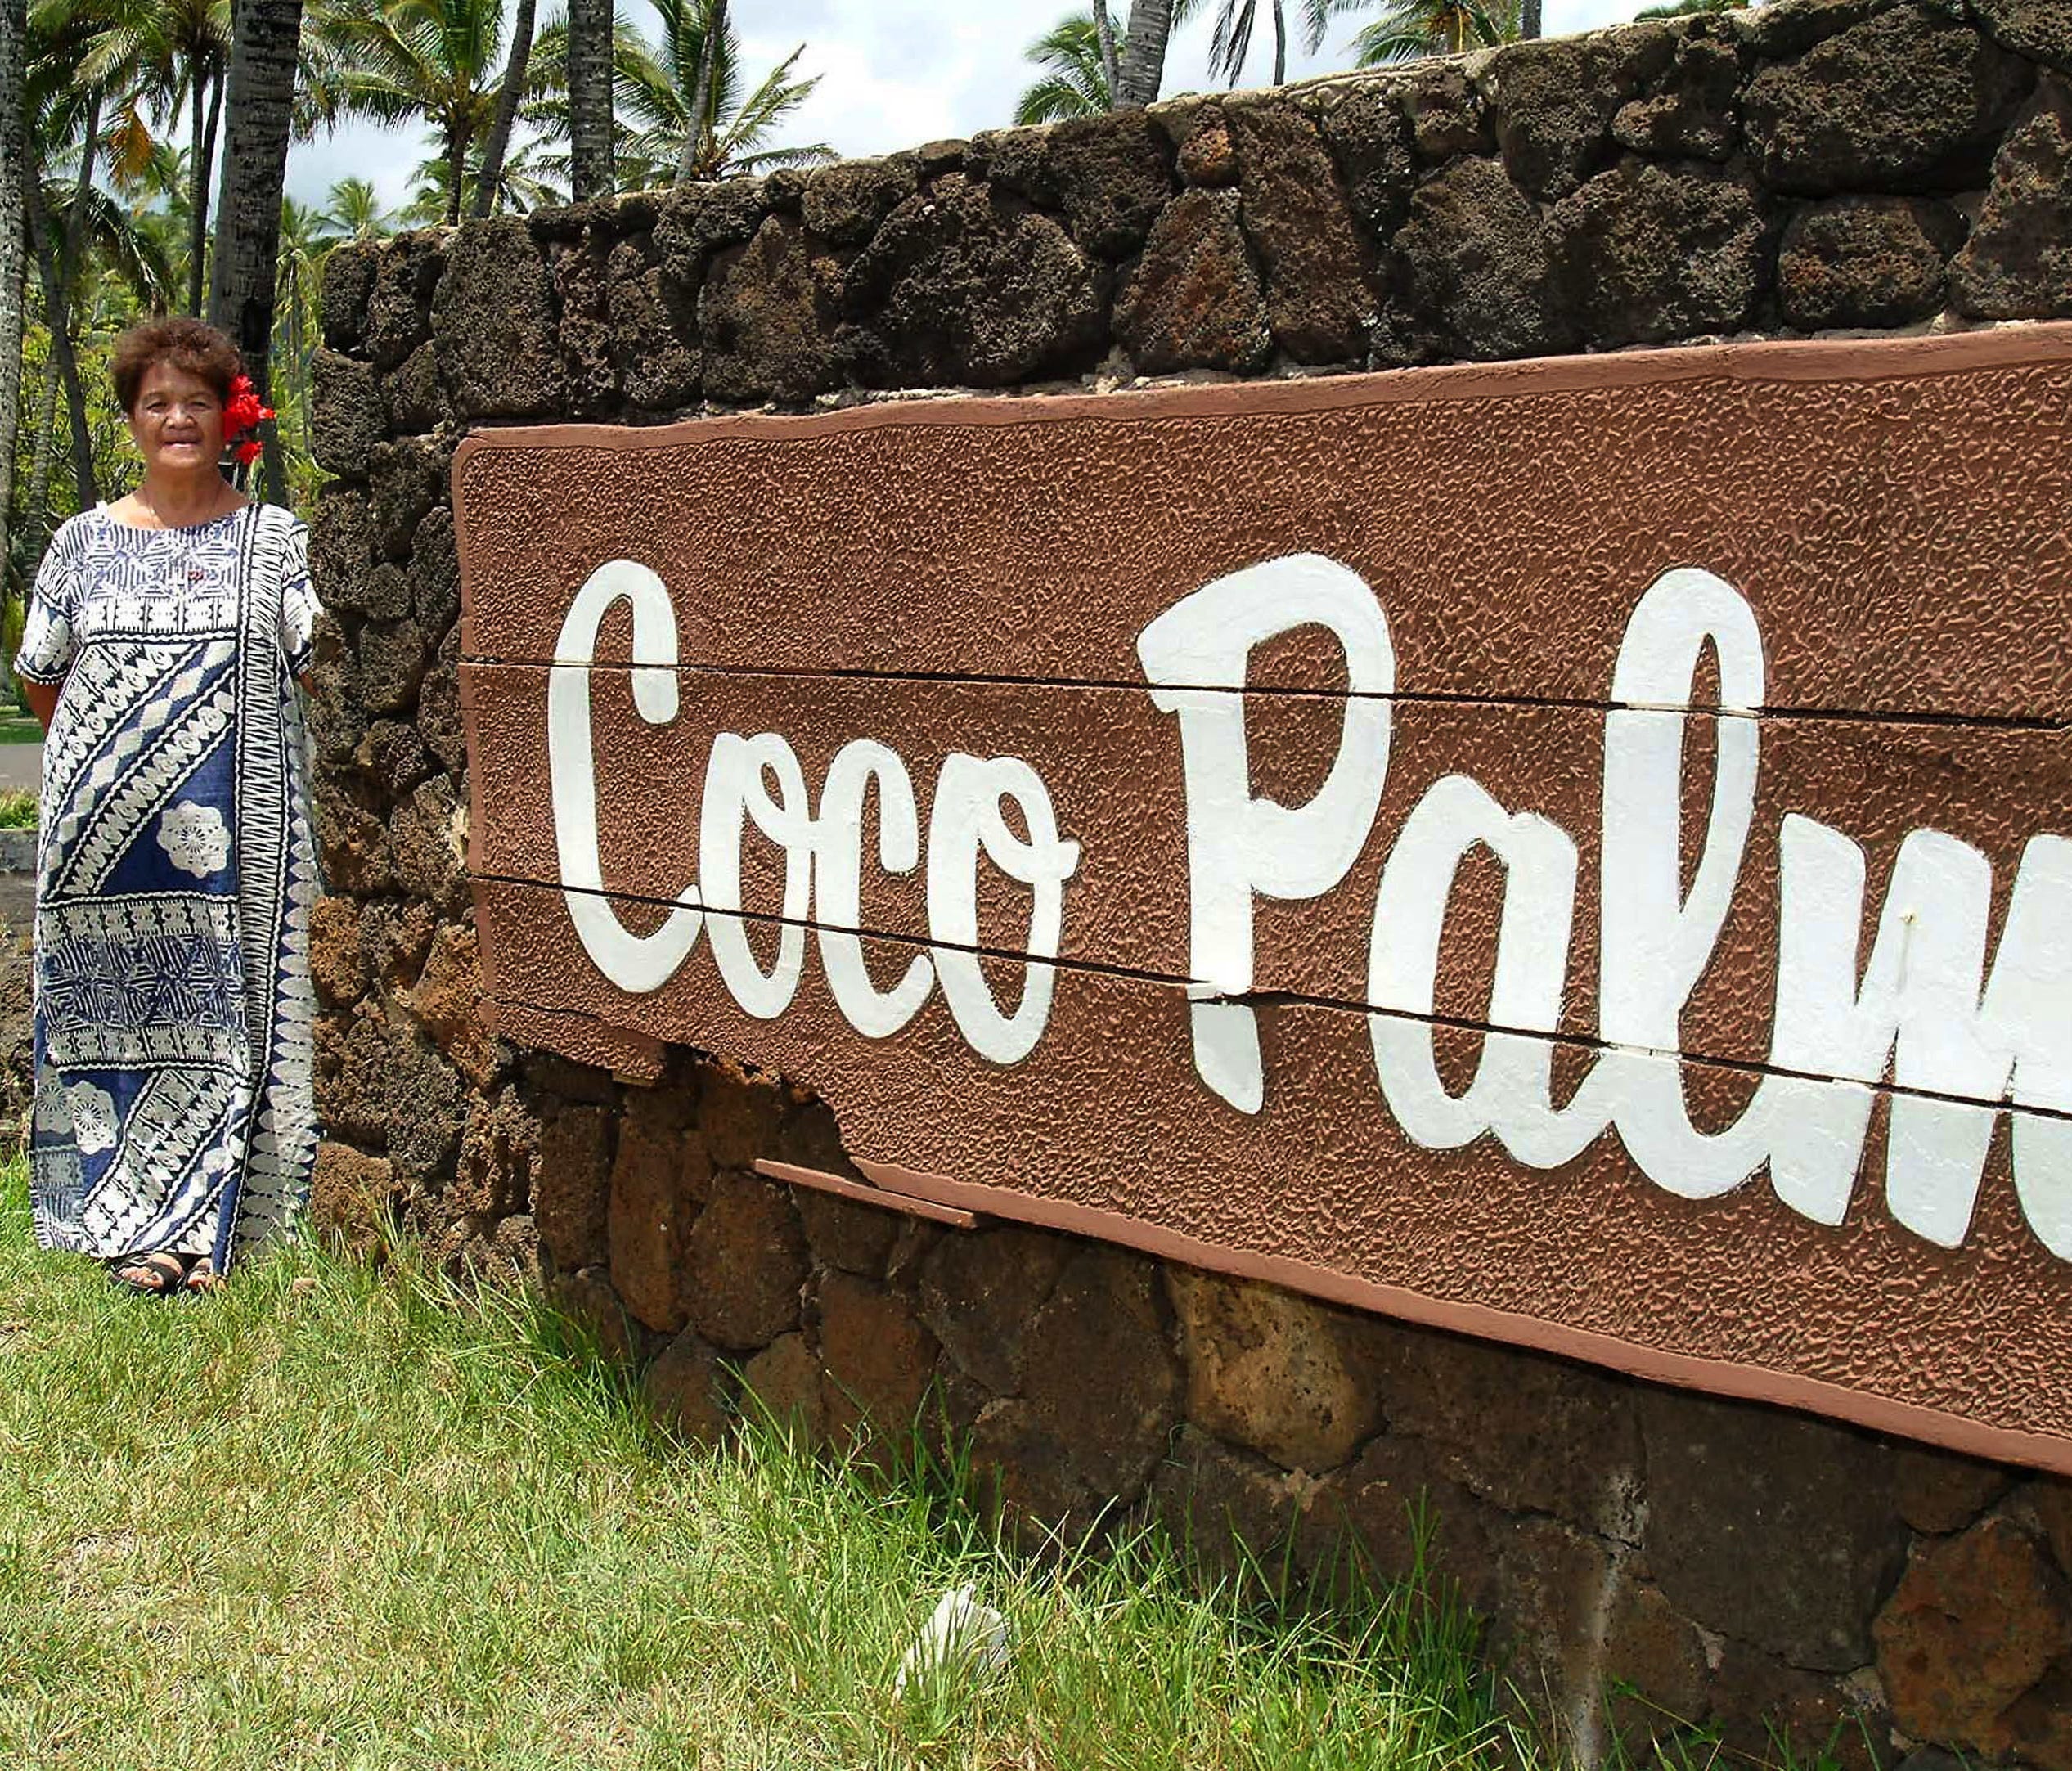 FILE - In this Sept. 4, 2002 file photo, Cecilia Dana poses for a photo beside a Coco Palms resort sign in Wailua on the island of Kauai in Hawaii. Native Hawaiian activists, who claim to be descendants of Kauai's last king, are occupying the propert